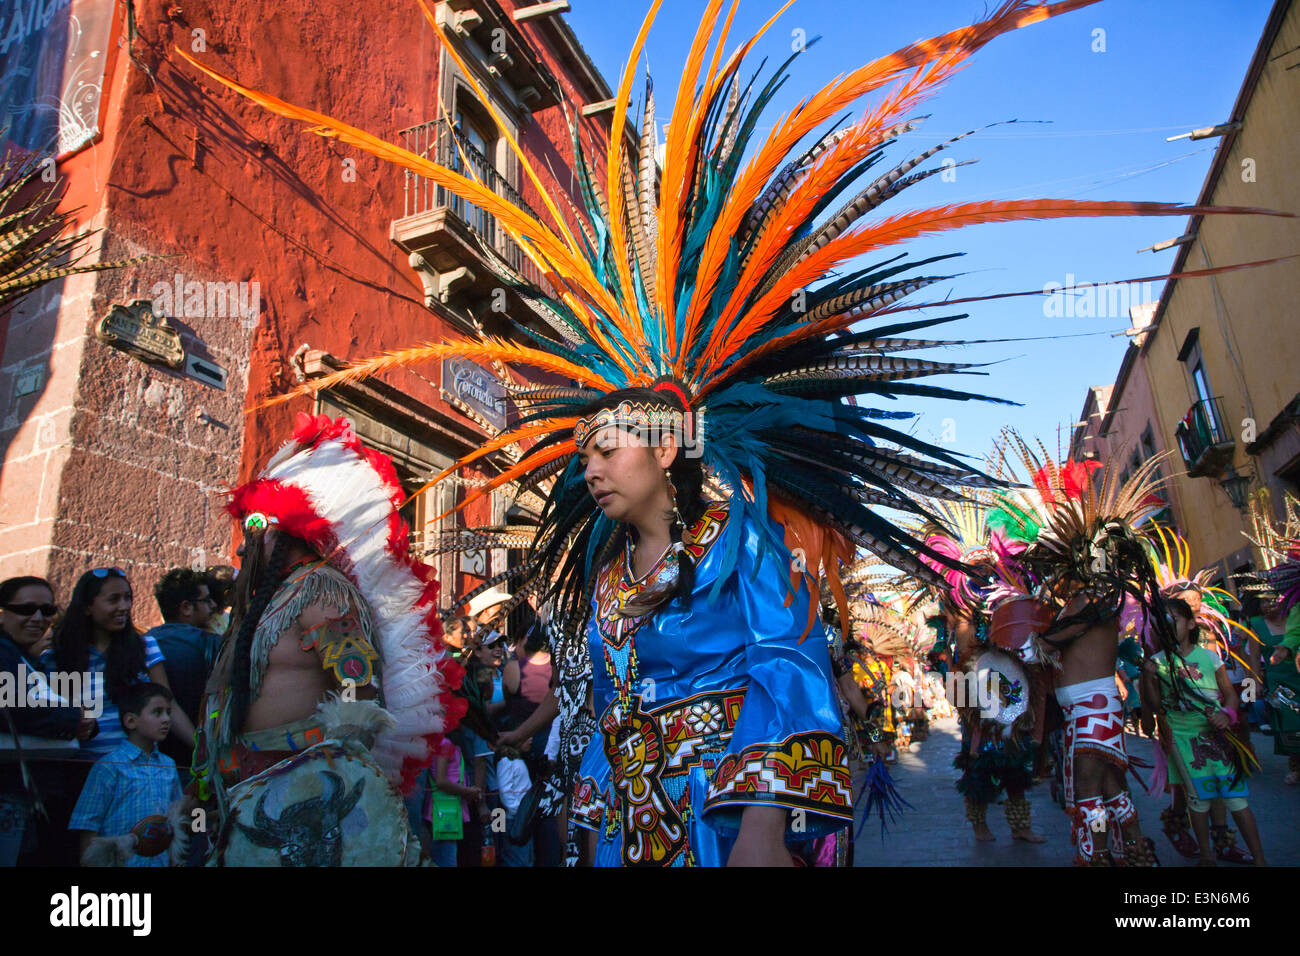 DANCE TROUPES from all over MEXICO parade through the streets of San Miguel Arcangel, the patron saint of SAN MIGUEL DE ALLENDE Stock Photo